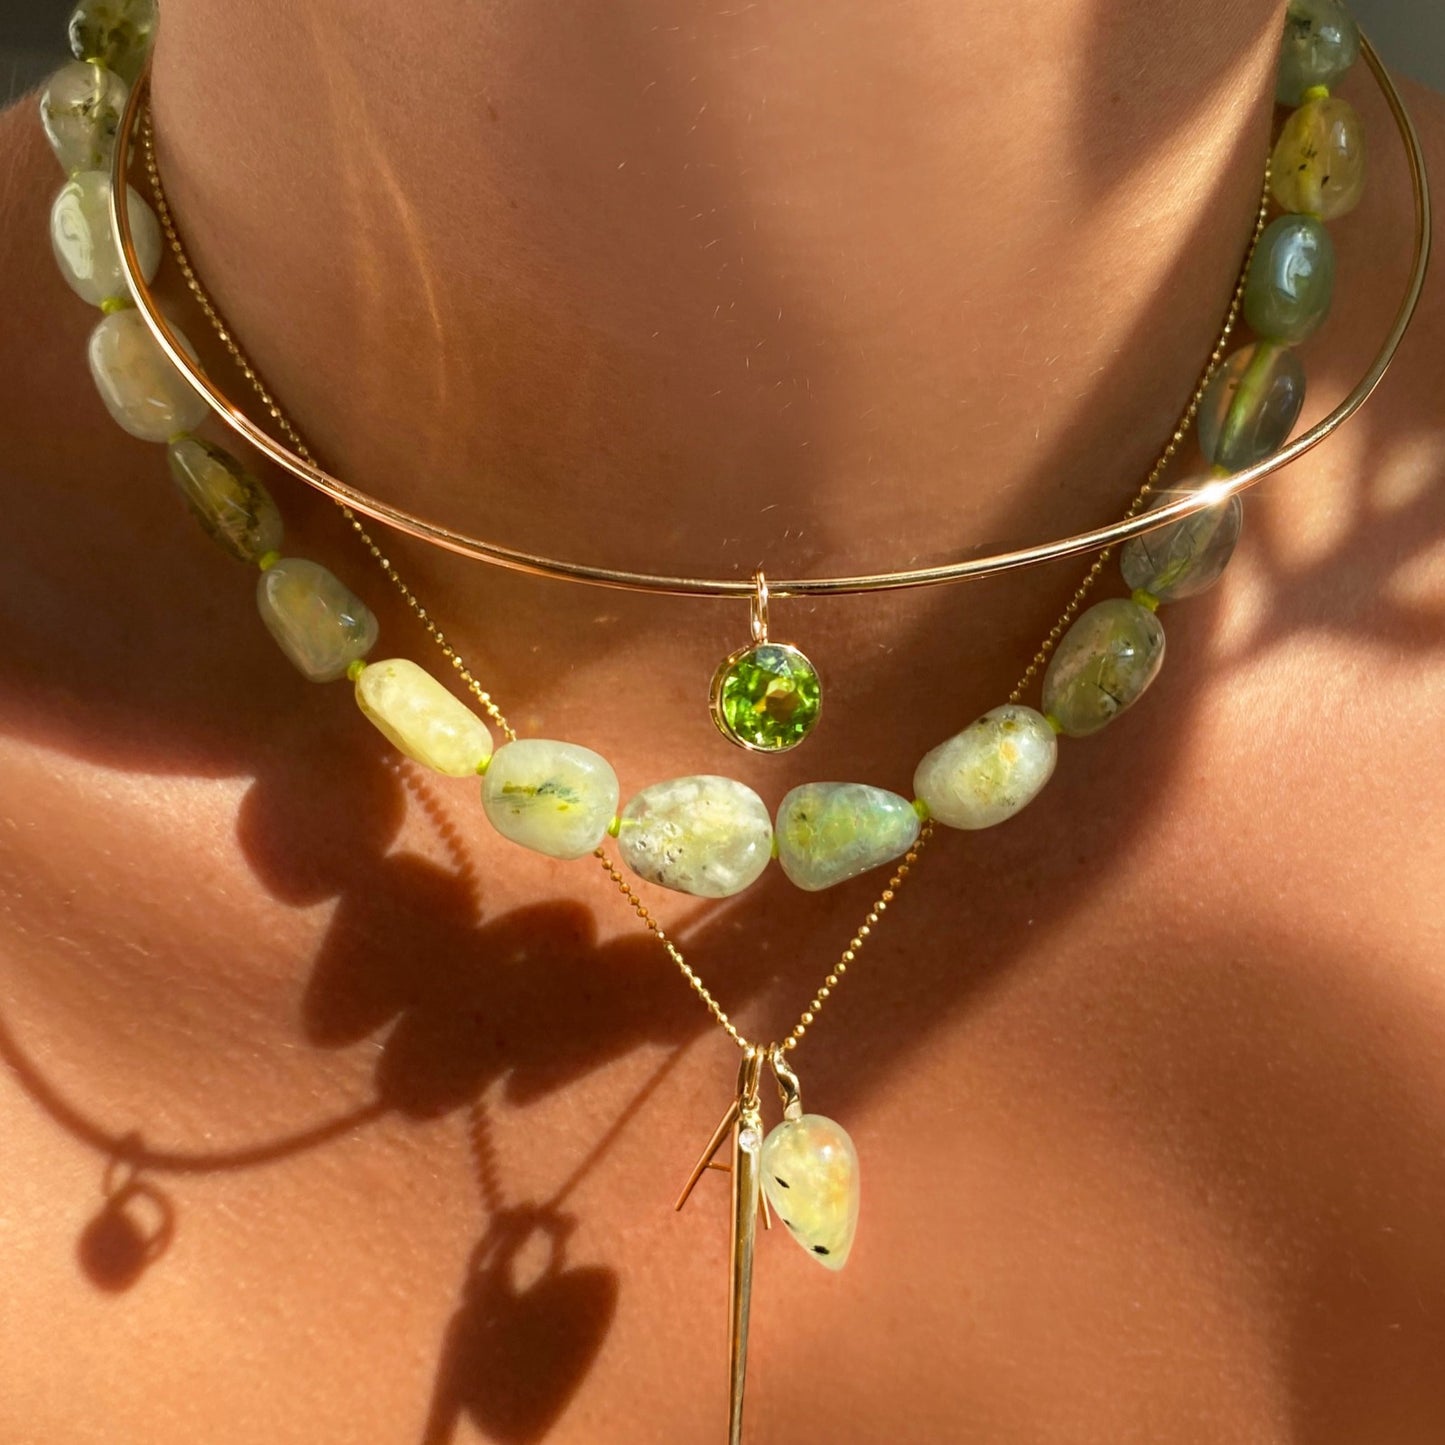 14k gold Peridot Round Solitaire Charm. Styled on a neck hanging from a wire choker necklace.